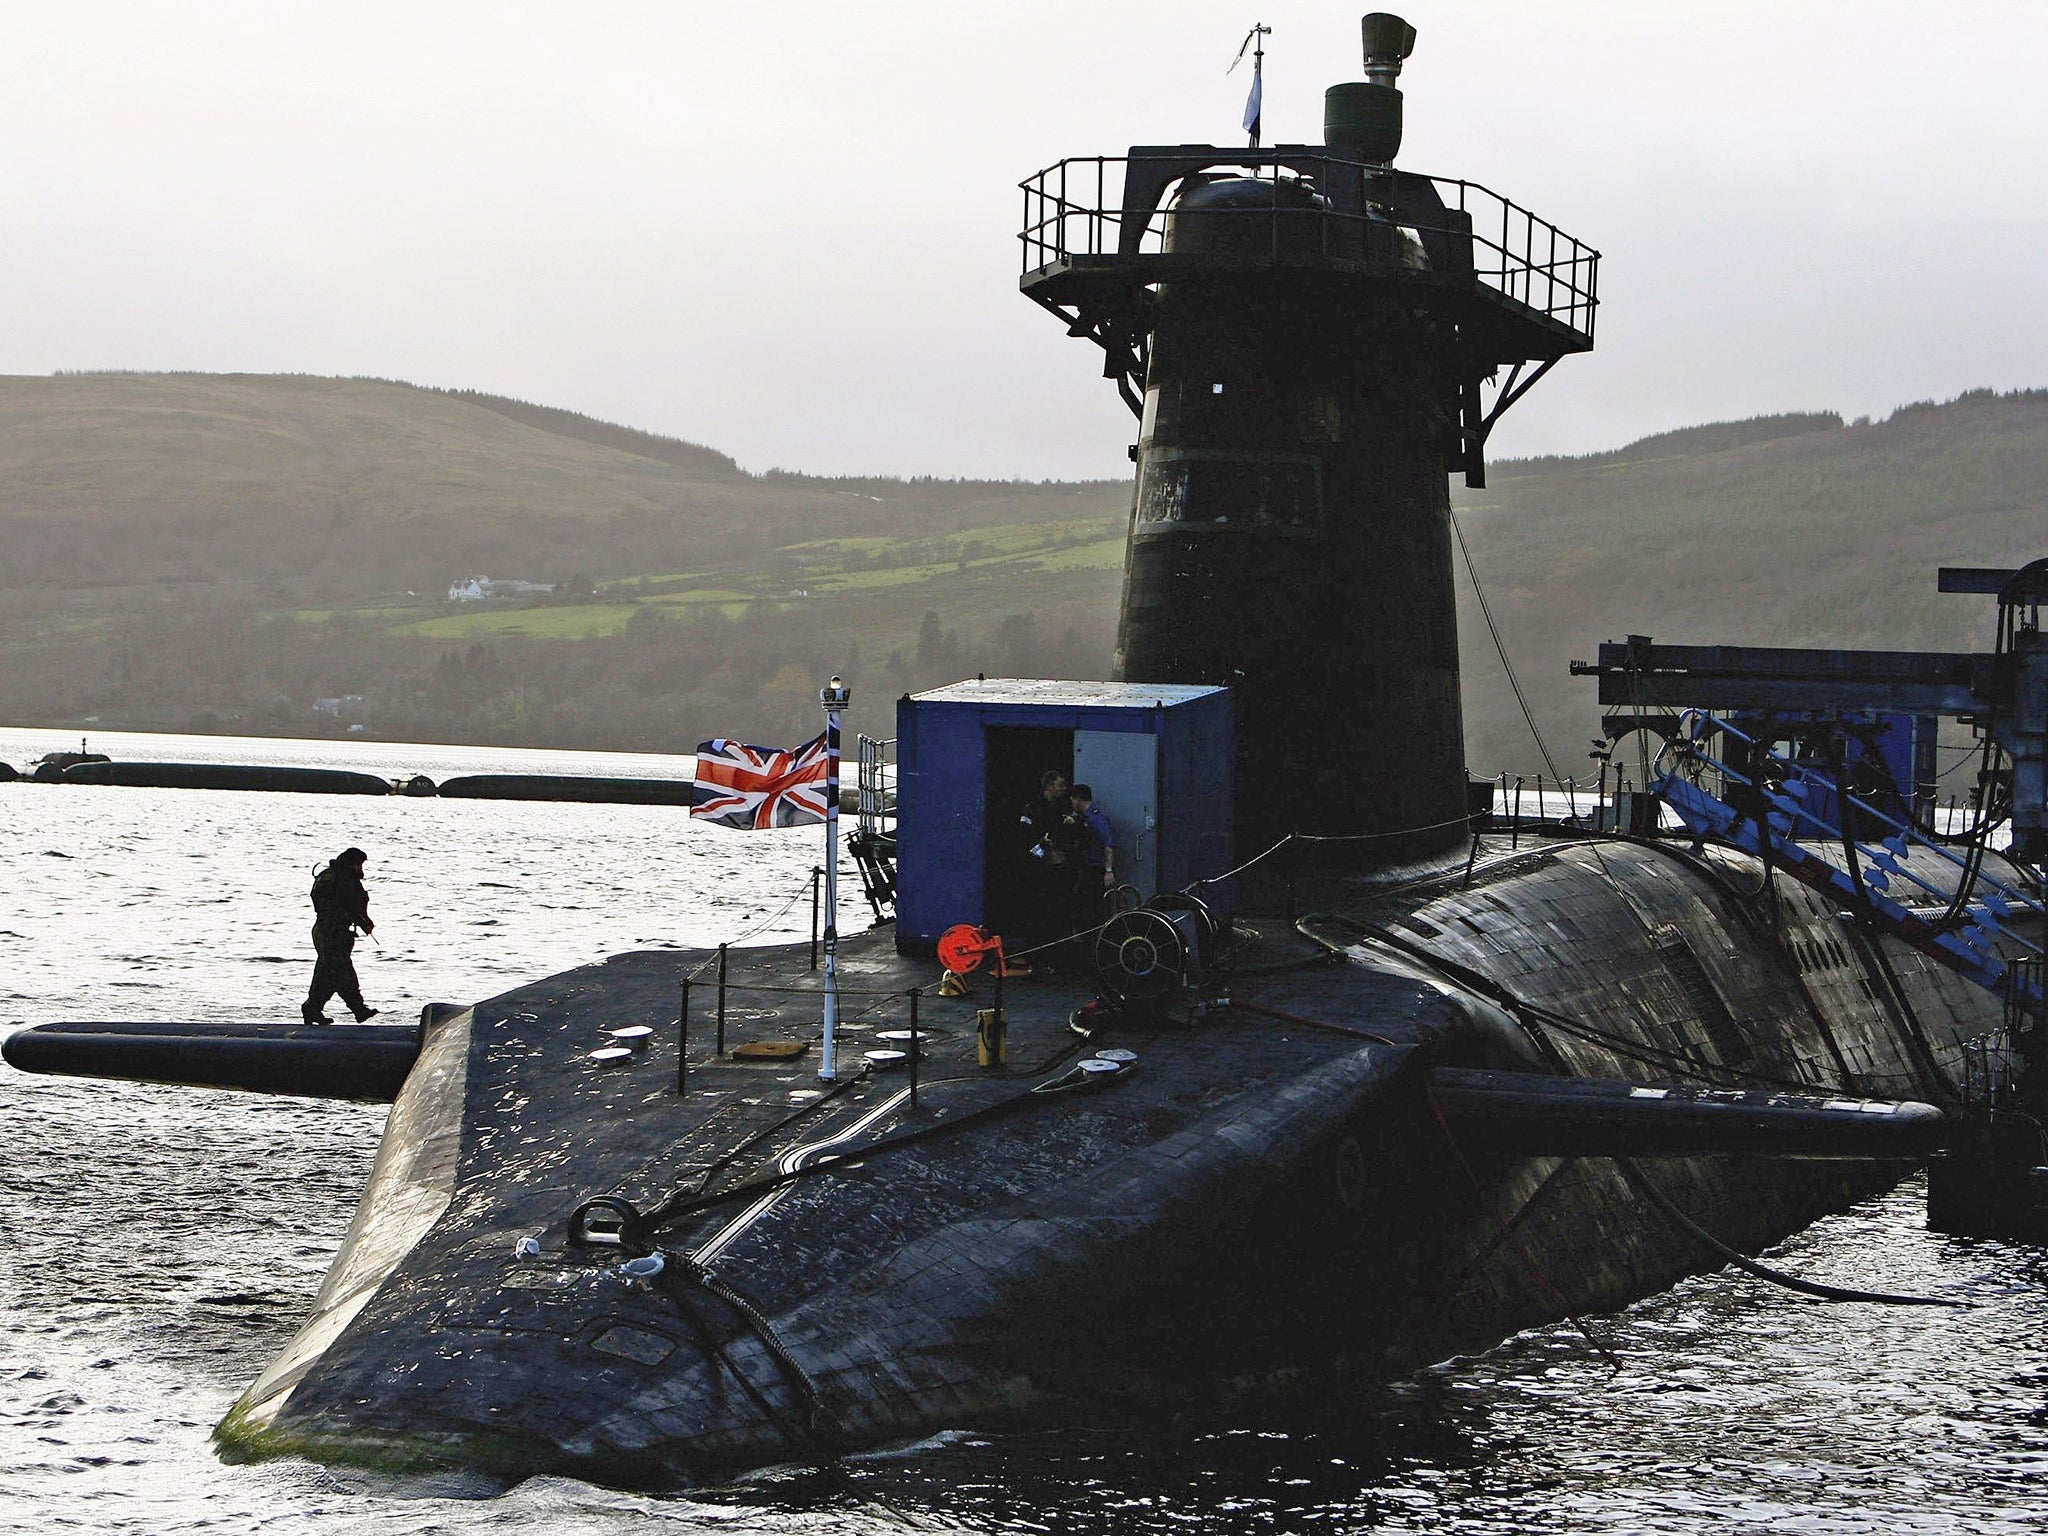 HMS Vanguard, one of Britain's Trident nuclear submarines, sits in dock at Faslane Submarine base on the river Clyde in Helensburgh, Scotland